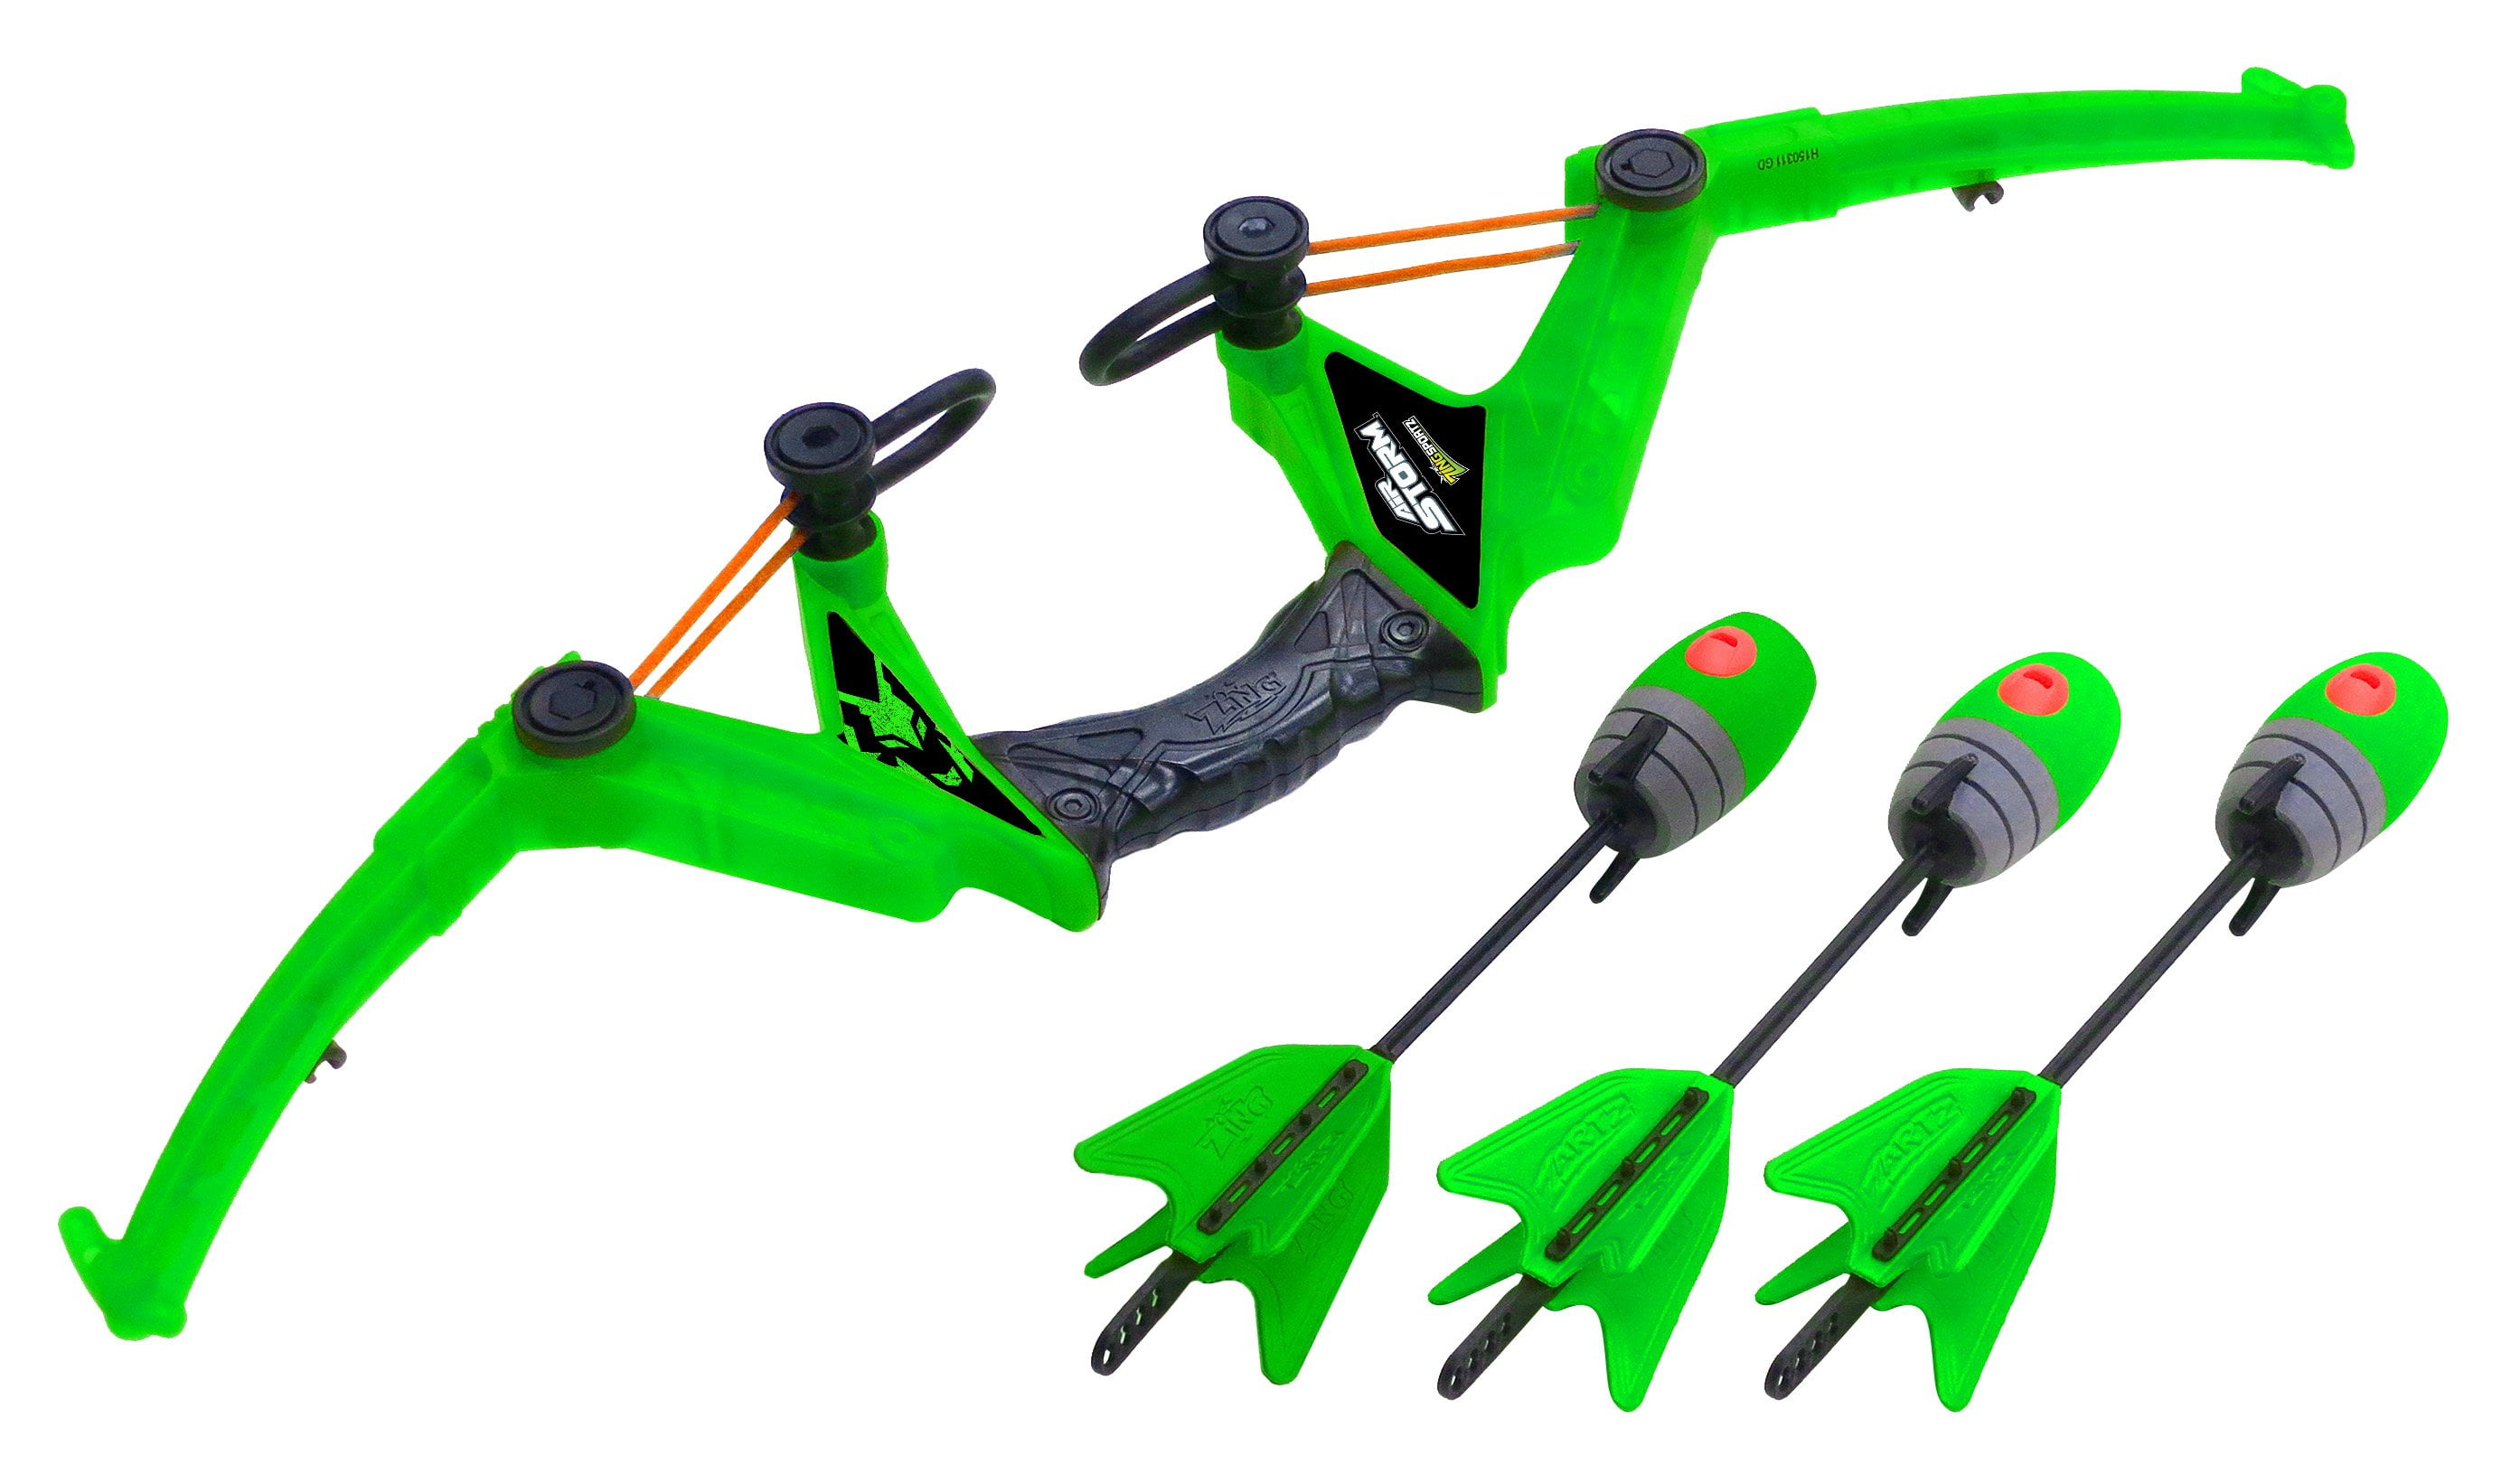 hul fingeraftryk hjælpeløshed Zing Air Storm Z-tek Bow - Green: High-Powered Outdoor Archery Set for  Action-Packed Fun and Precision Shooting, Green - Walmart.com